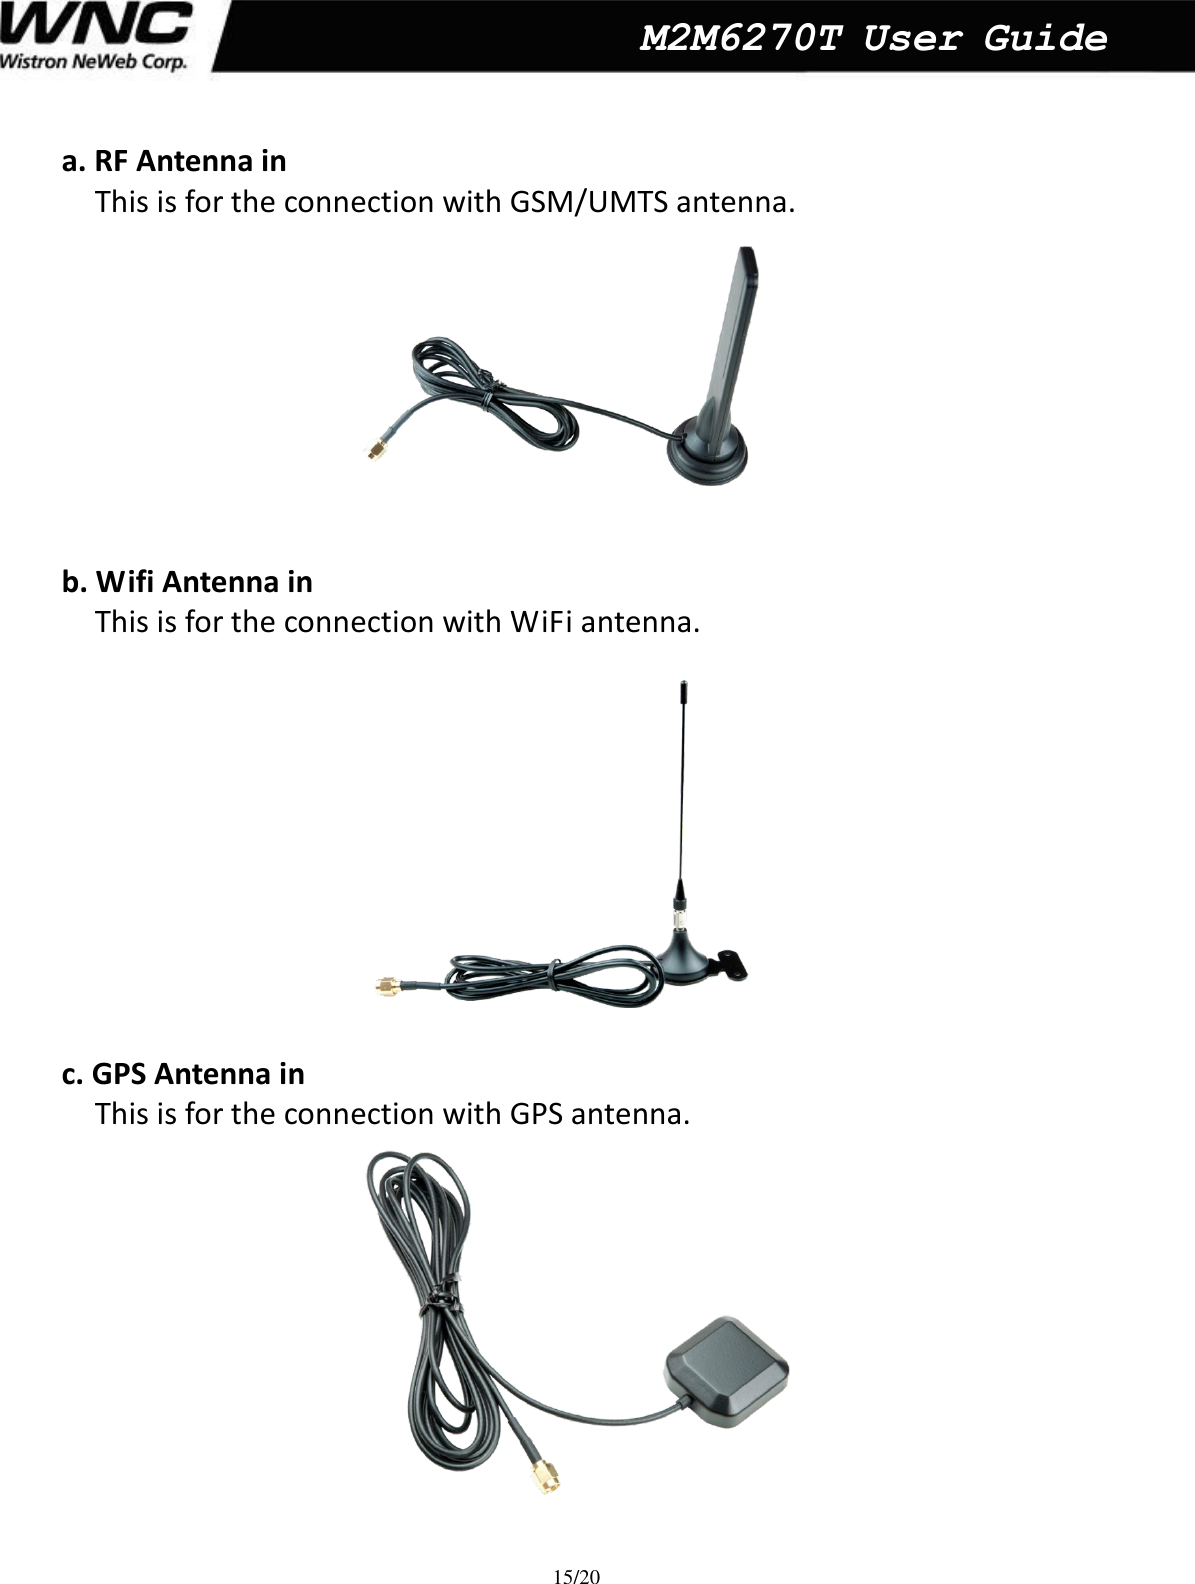  15/20  M2M6270T User Guide a. RF Antenna in   This is for the connection with GSM/UMTS antenna.  b. Wifi Antenna in   This is for the connection with WiFi antenna.   c. GPS Antenna in   This is for the connection with GPS antenna.   